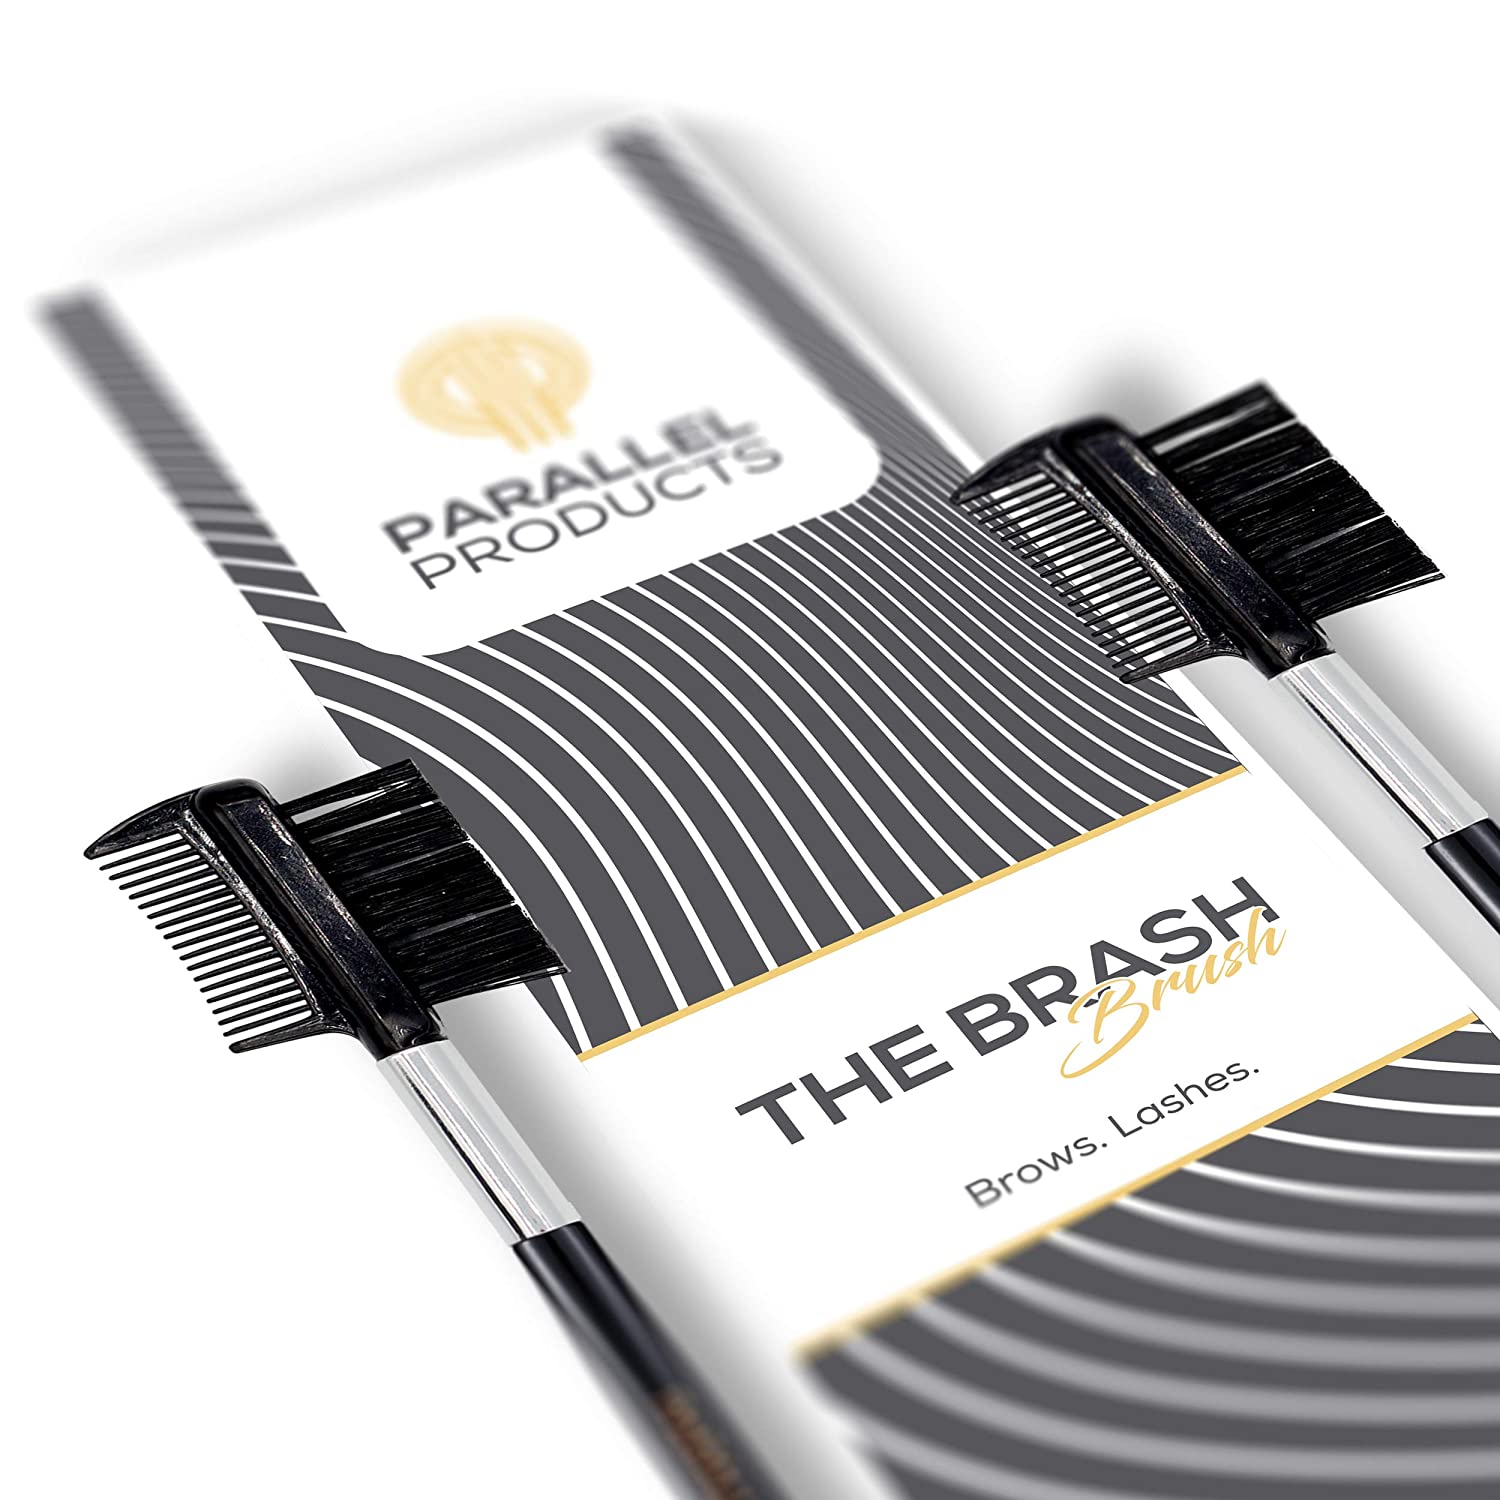 Parallel Products The Brash Brush Premium Brow and Lash Makeup Brush 2 Pack Close Up